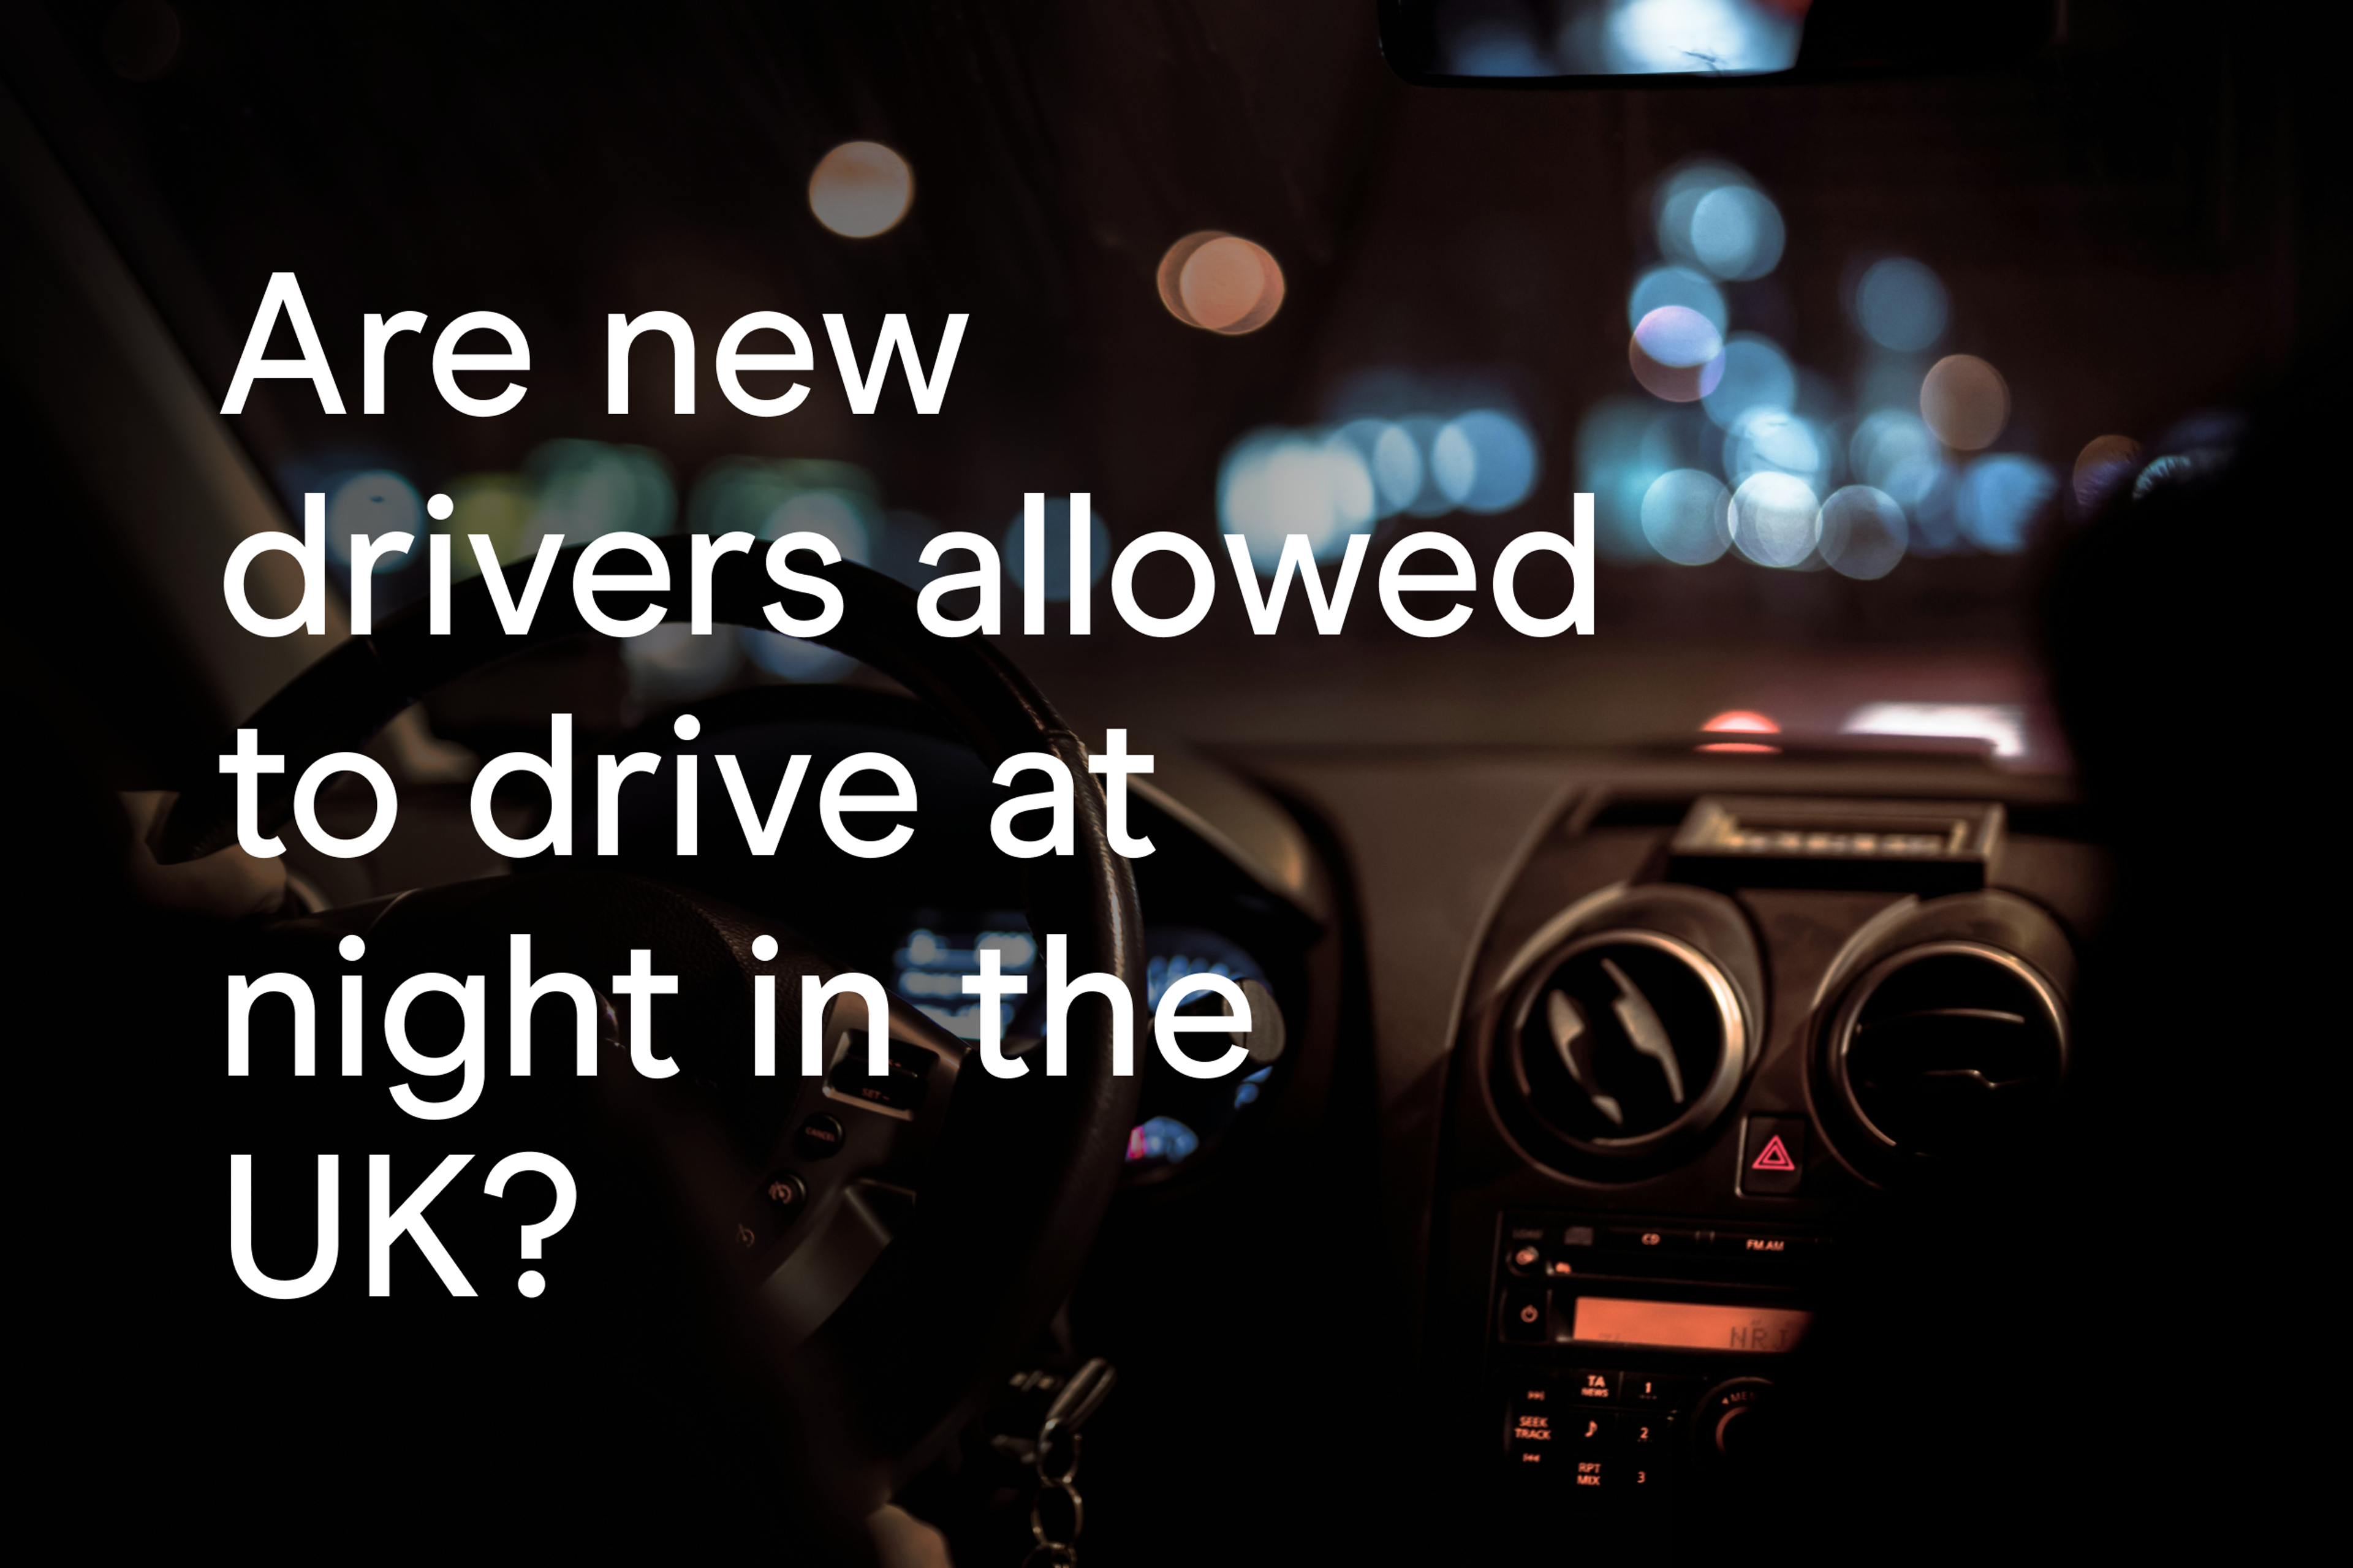 Are new drivers allowed to drive at night in the UK?